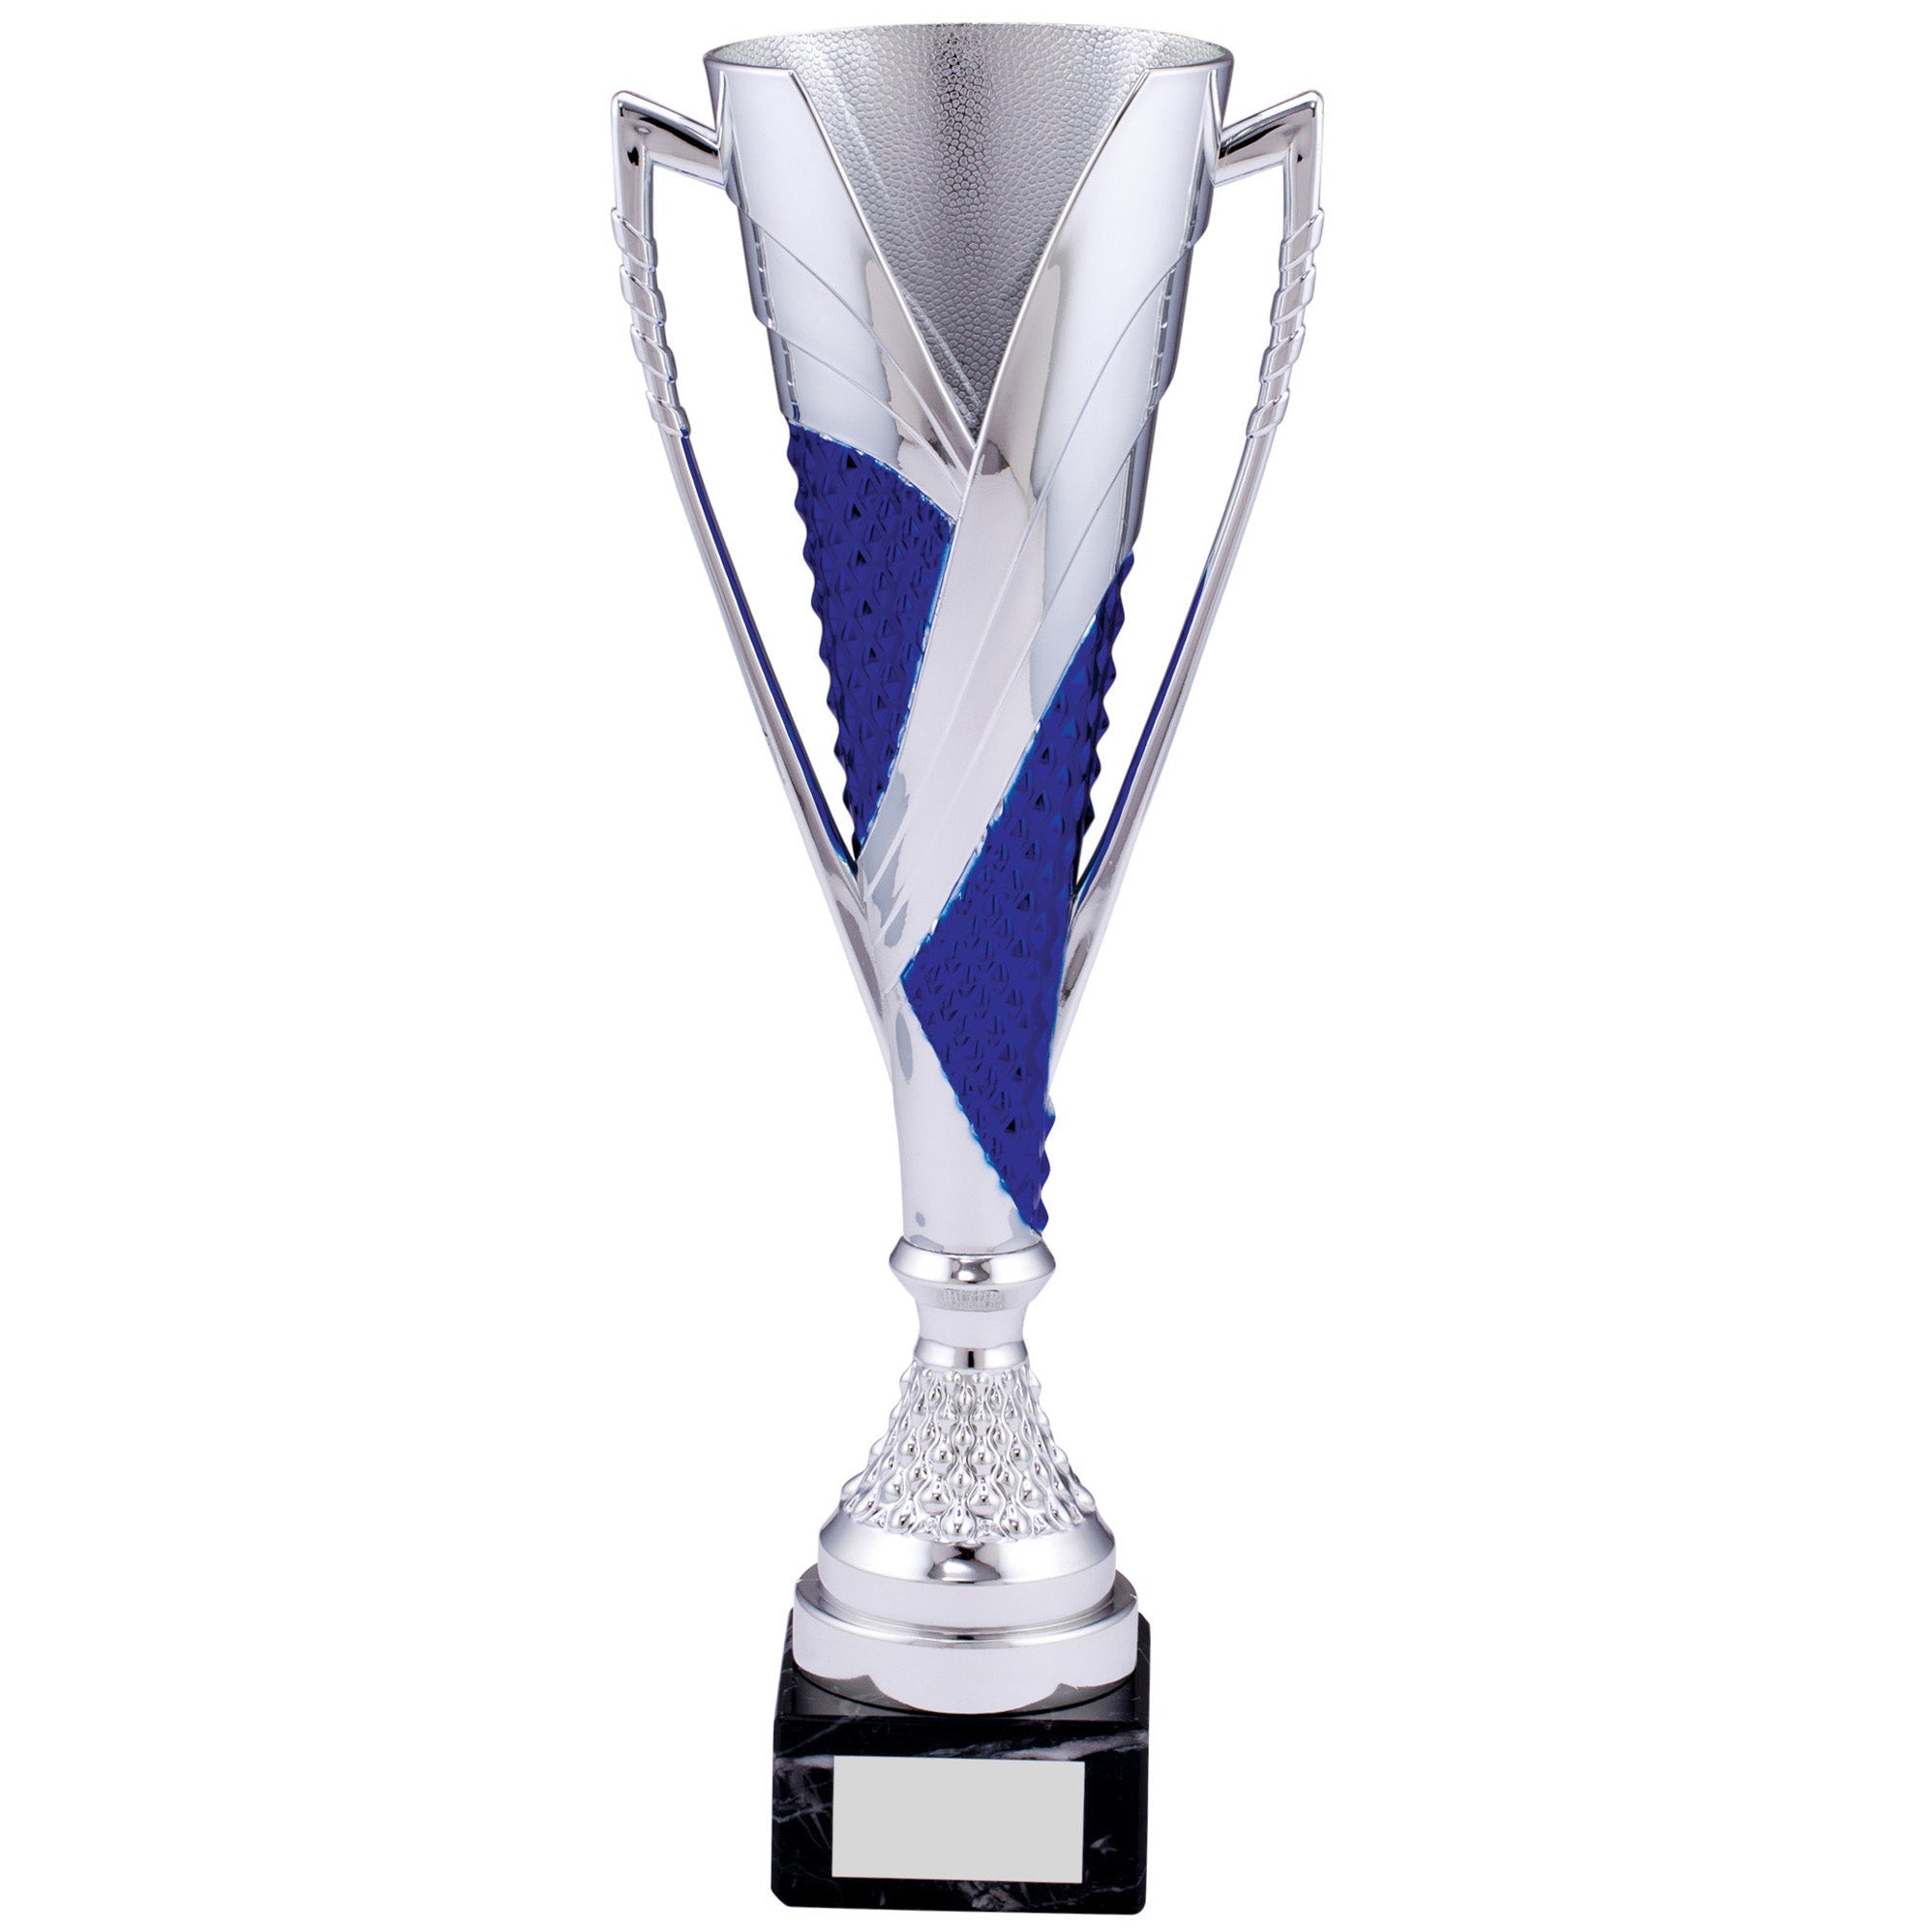 Silver Plastic Trophy Cup with Silver Texture on Black Marble Base